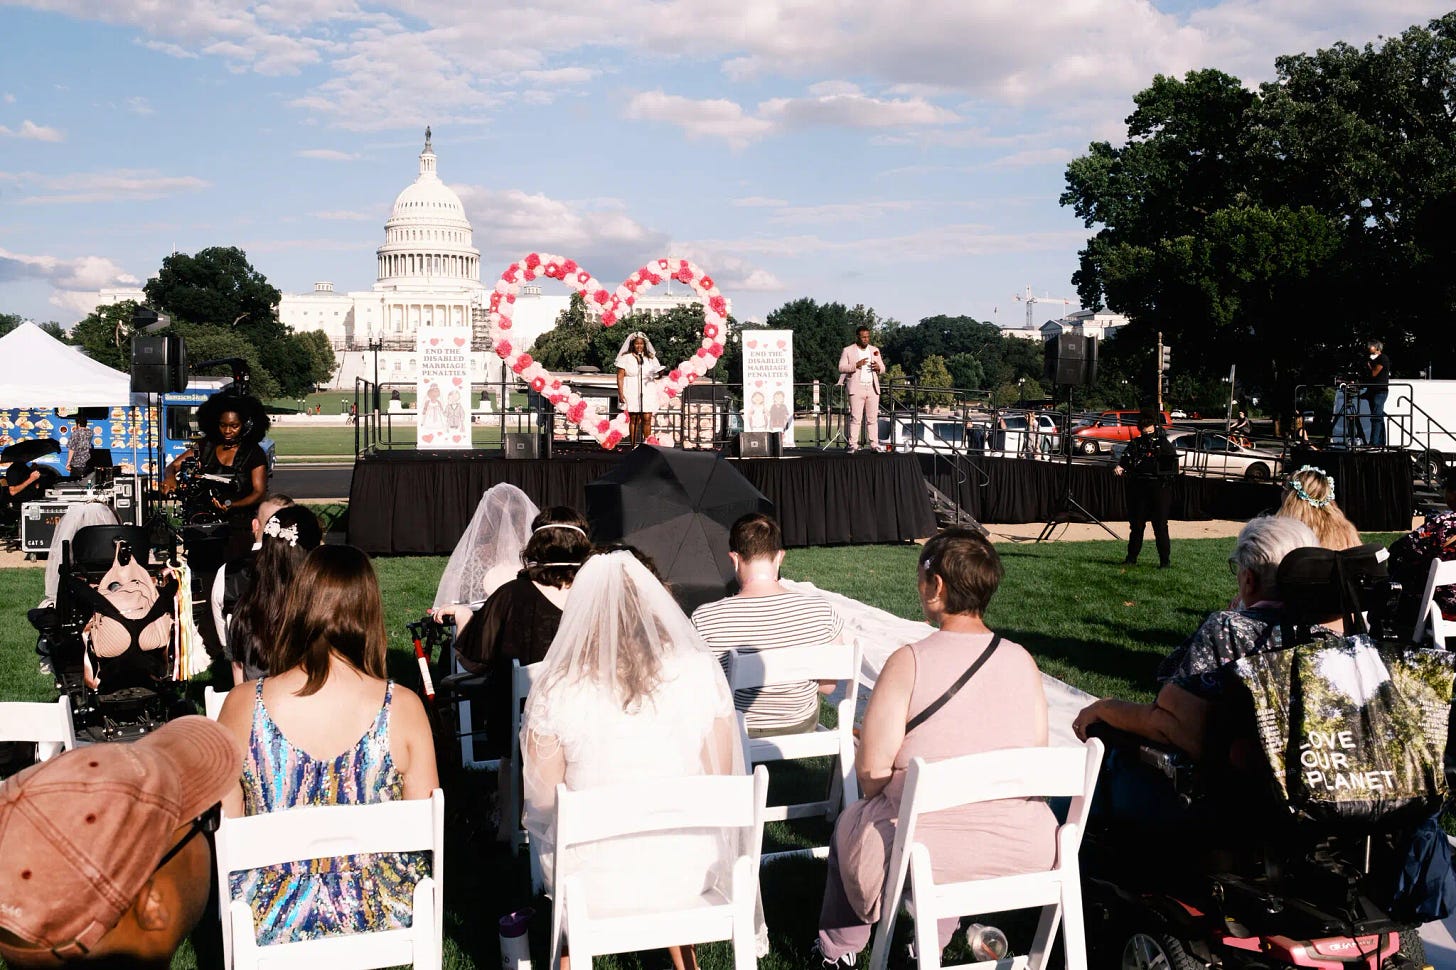 A photo of the National Mall with the Capitol building behind a stage. A wedding officiant demonstrates maximum brightness and audacity from a stage outfitted with a towering pink-and-red heart and “End the Disabled Marriage Penalties” banners. Disabled couples sit in white chairs on the lawn.